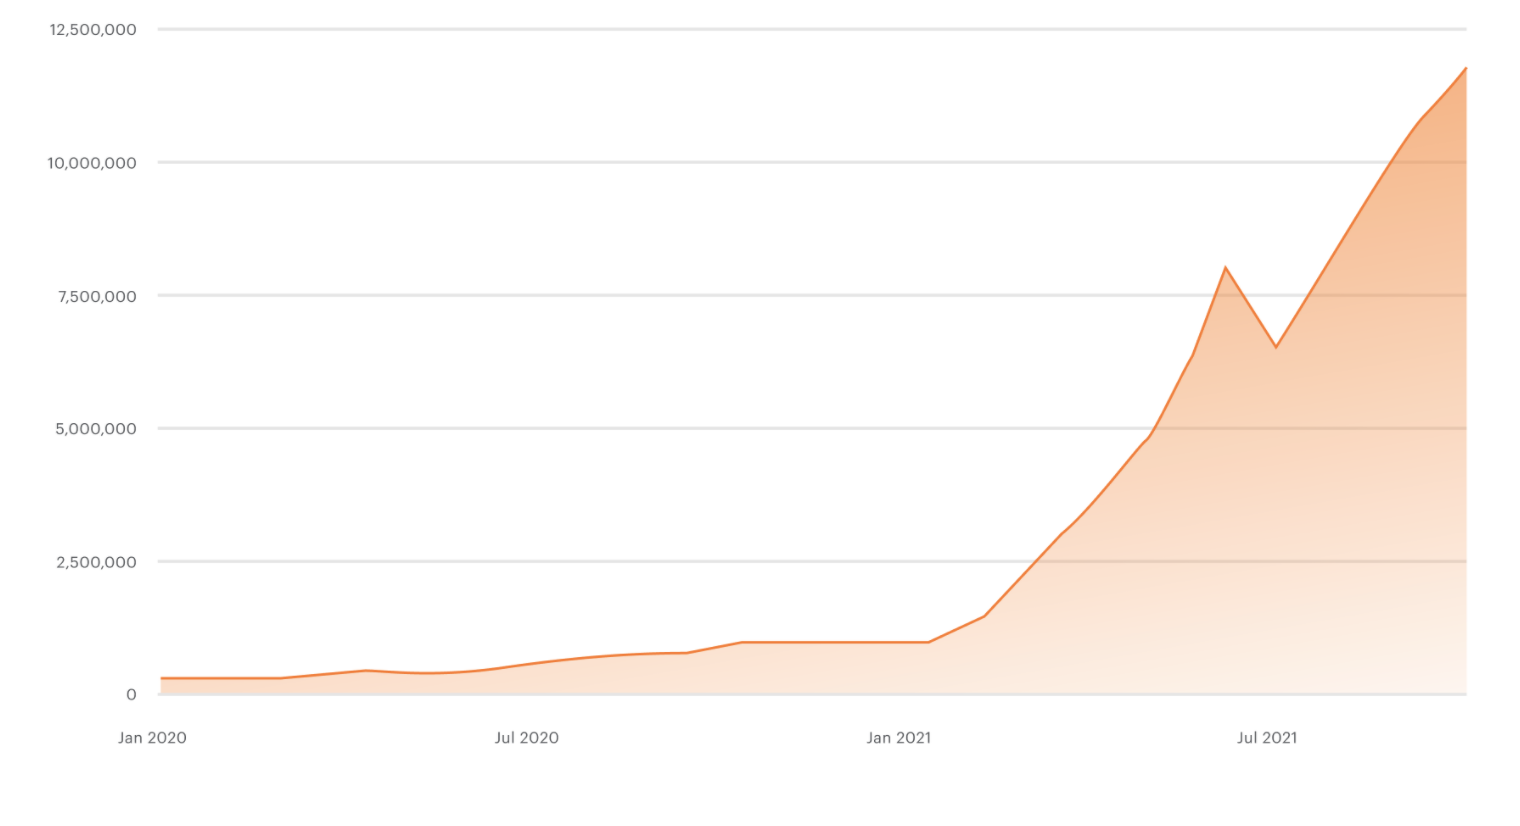 Metamask monthly active users, Jan 2021